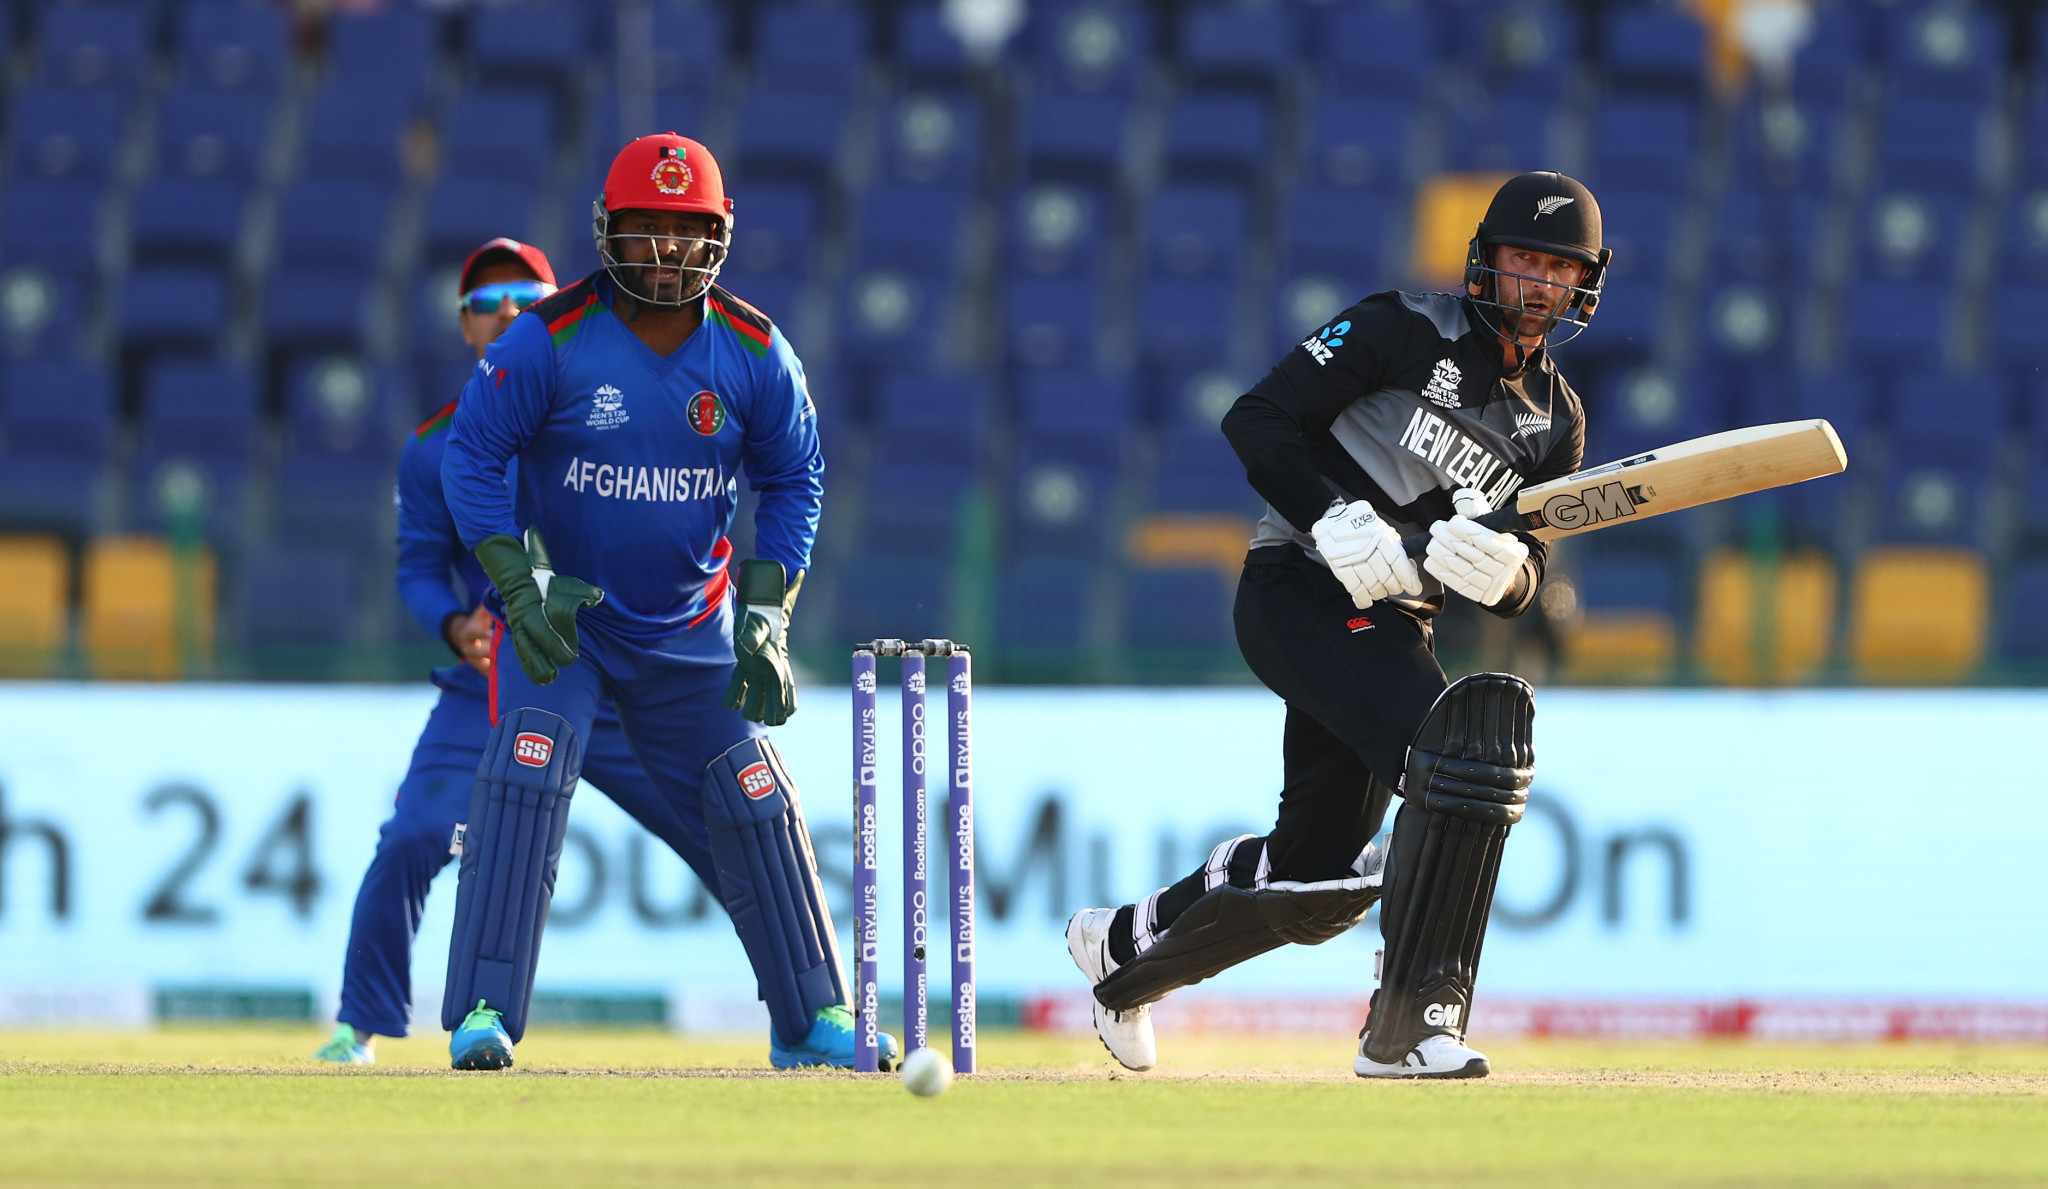 New Zealand's victory eliminated India and Afghanistan from the tournament ©Getty Images